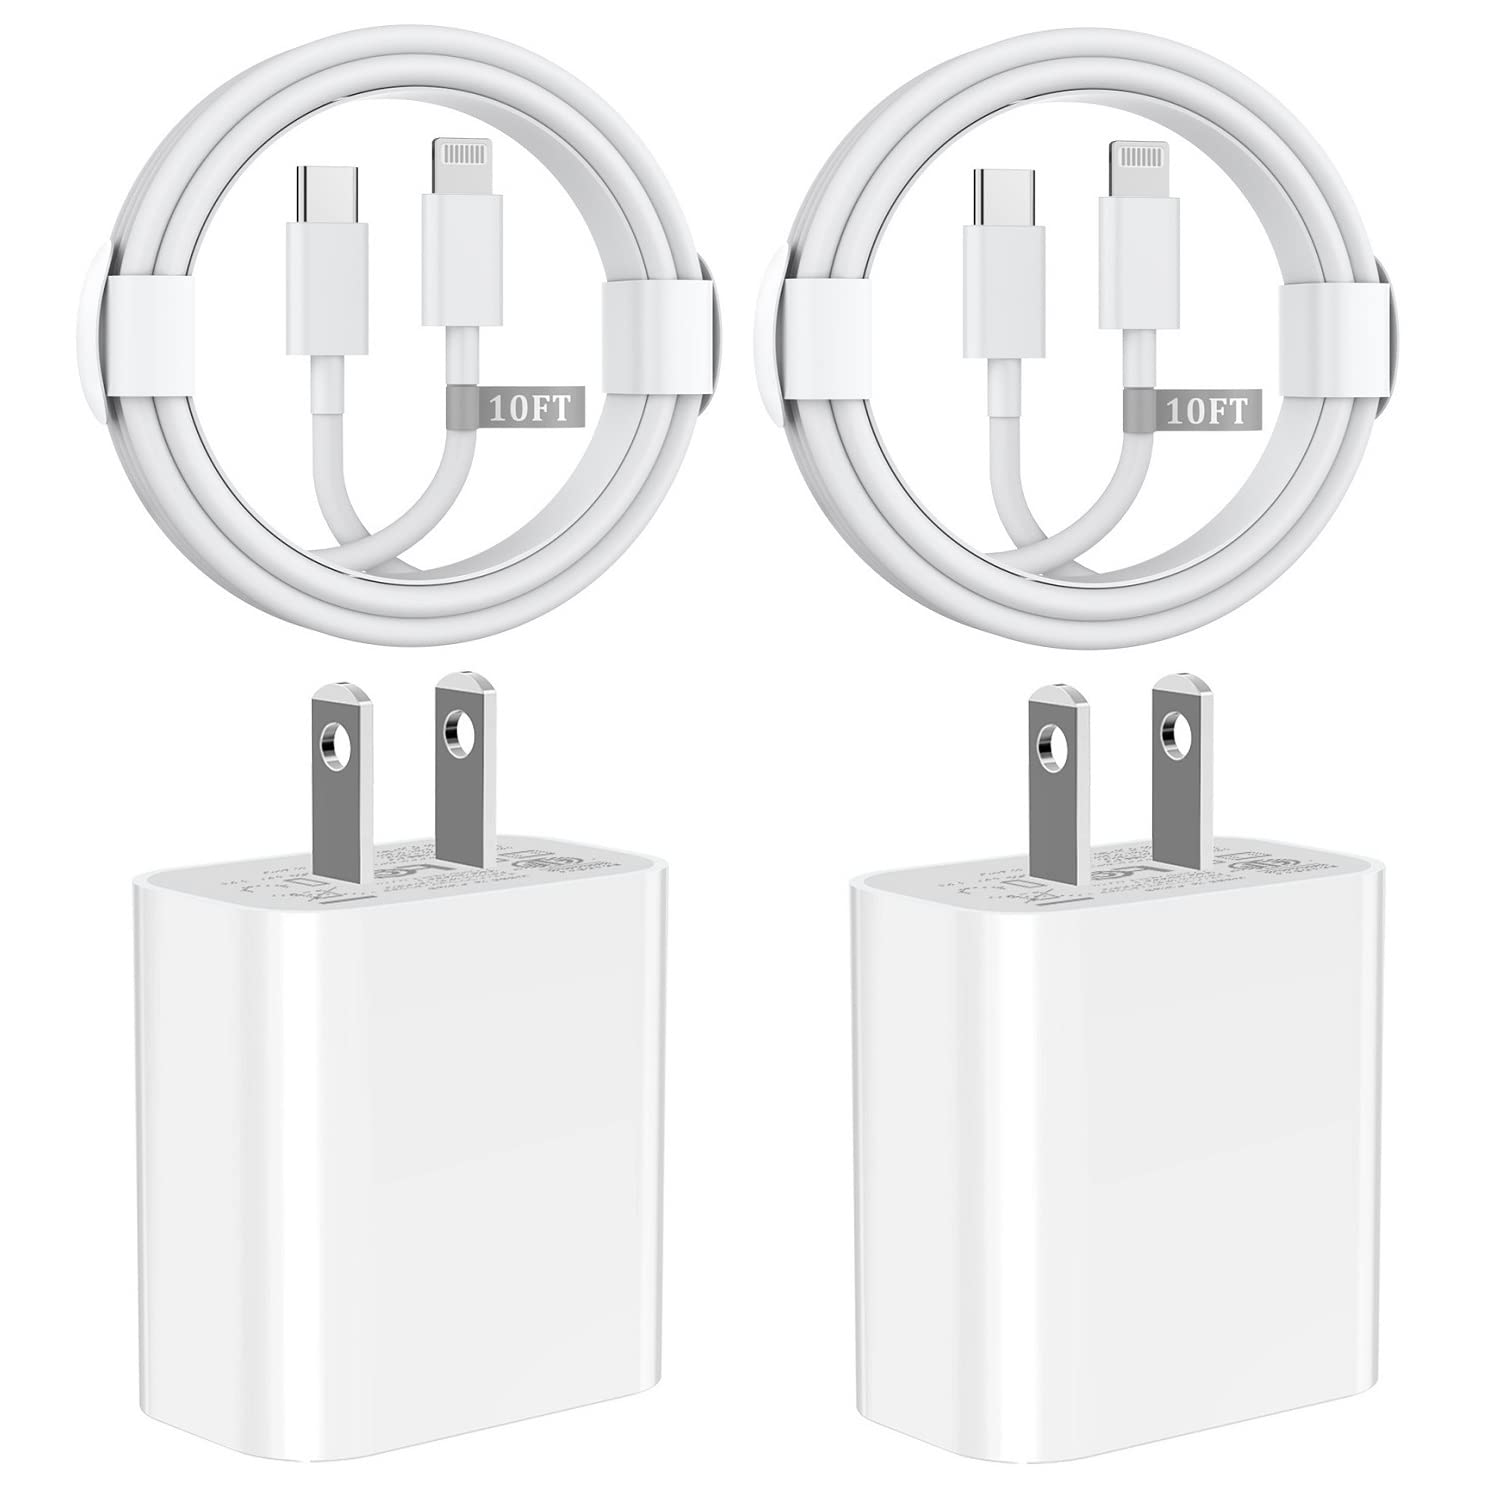 iPhone 14 13 12 Fast Charger 10 FT, [Apple MFi Certified] 2 Pack PD 20W USB C Wall Charger Block with 10FT Extra Long Type C to Lightning Fast Charging Data Sync Cable for iPhone 14 13 12 11 XS XR X 8